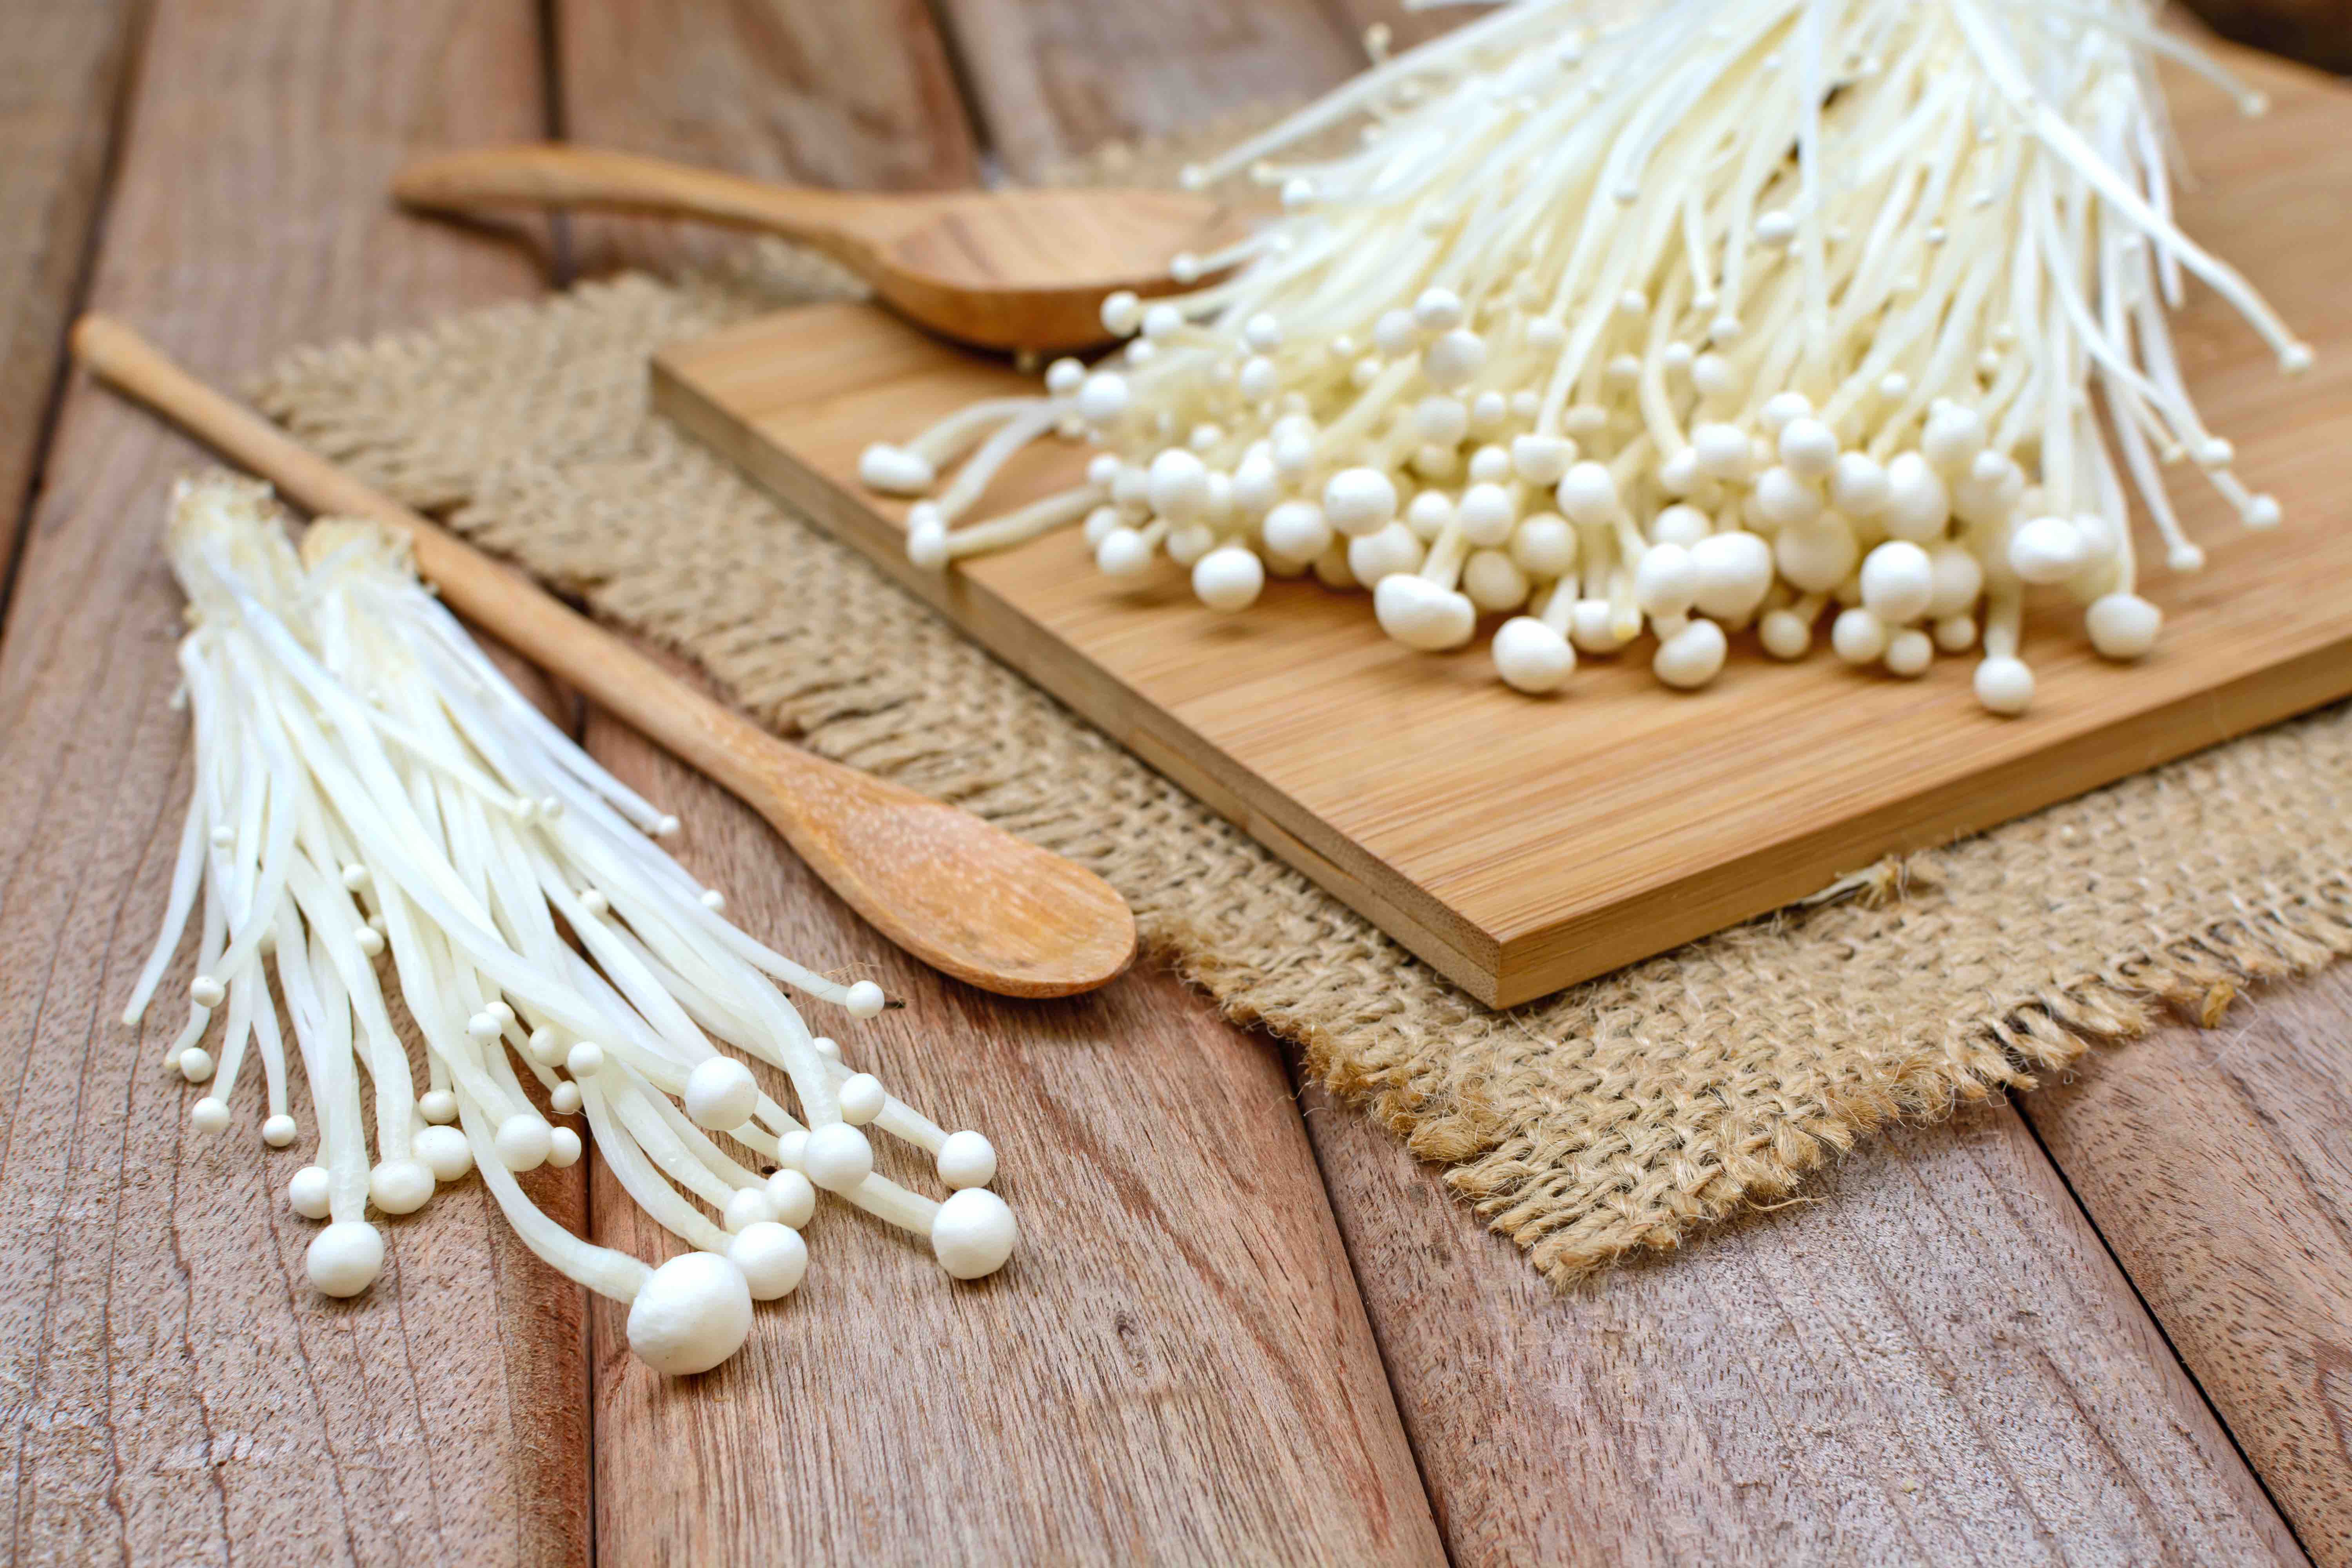 Enoki mushrooms on a wooden picnic table on a burlap mat and wood cutting board. A wooden spoon is on the side.